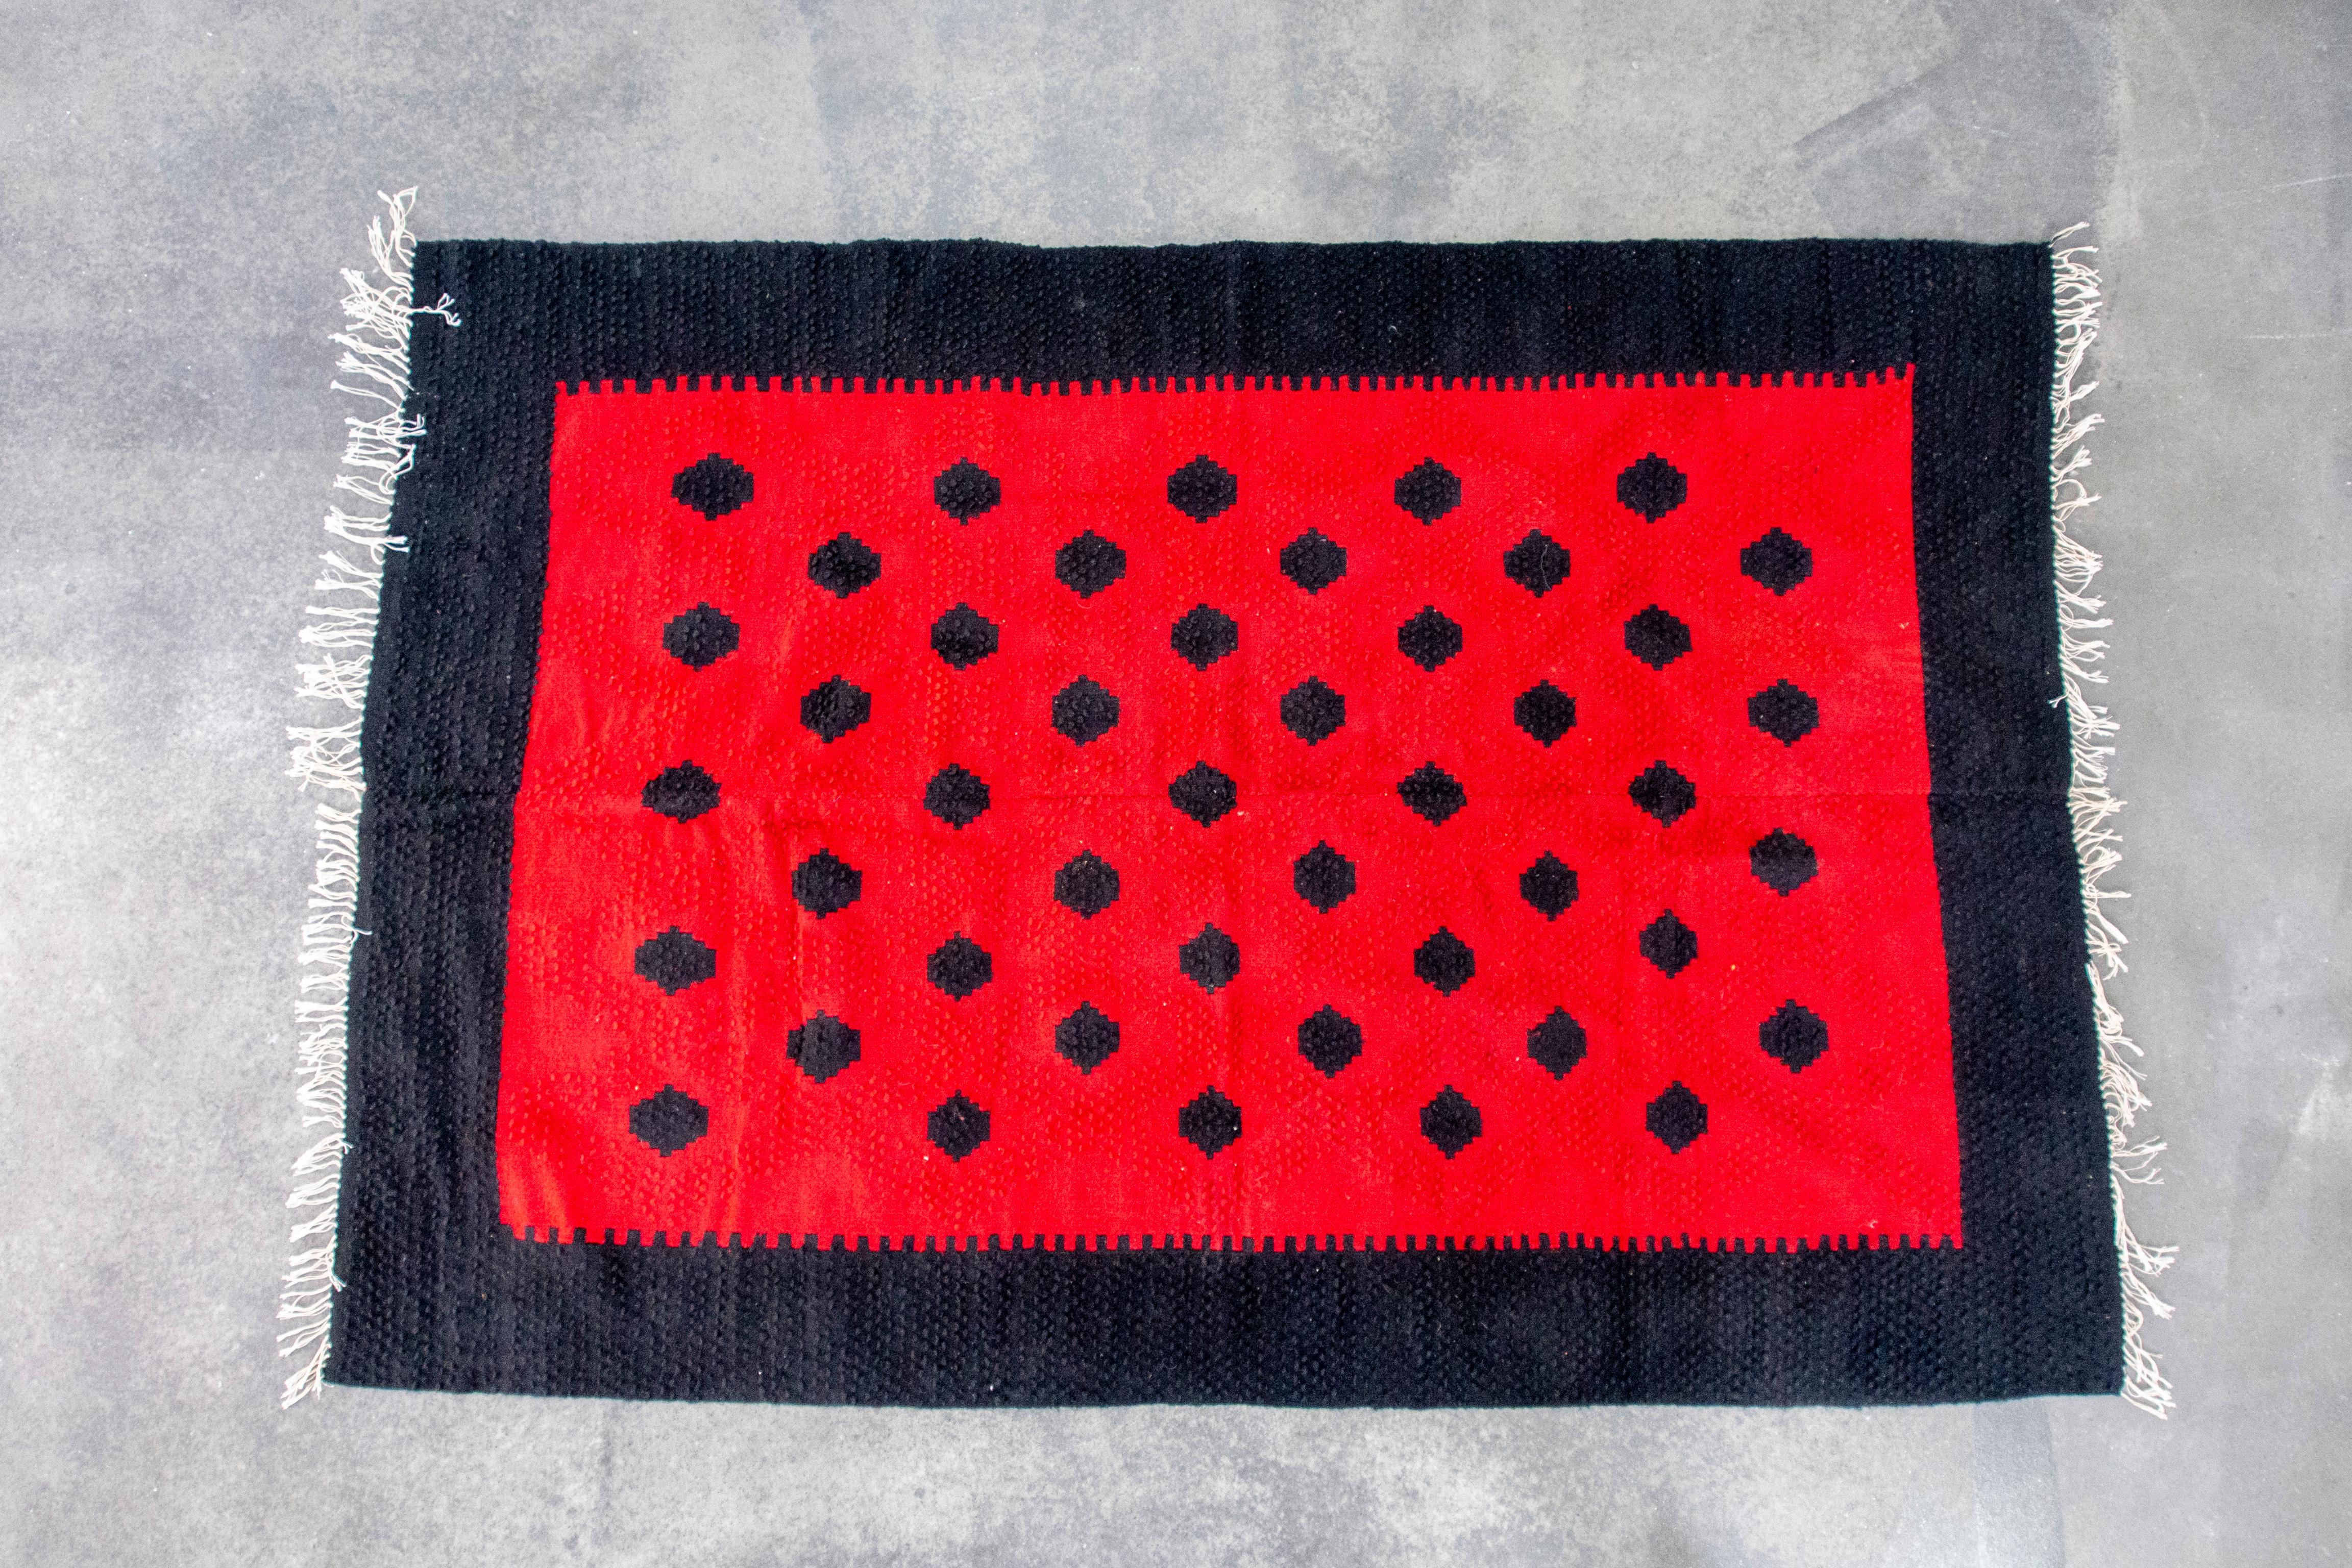 In this listing you will find a beautiful hand-woven kilim in red and black wool. It features geometrical pattern, inspired by a watermelon or ladybug. Vibrant red in stark contrast with black makes for a very attractive piece of decor for your